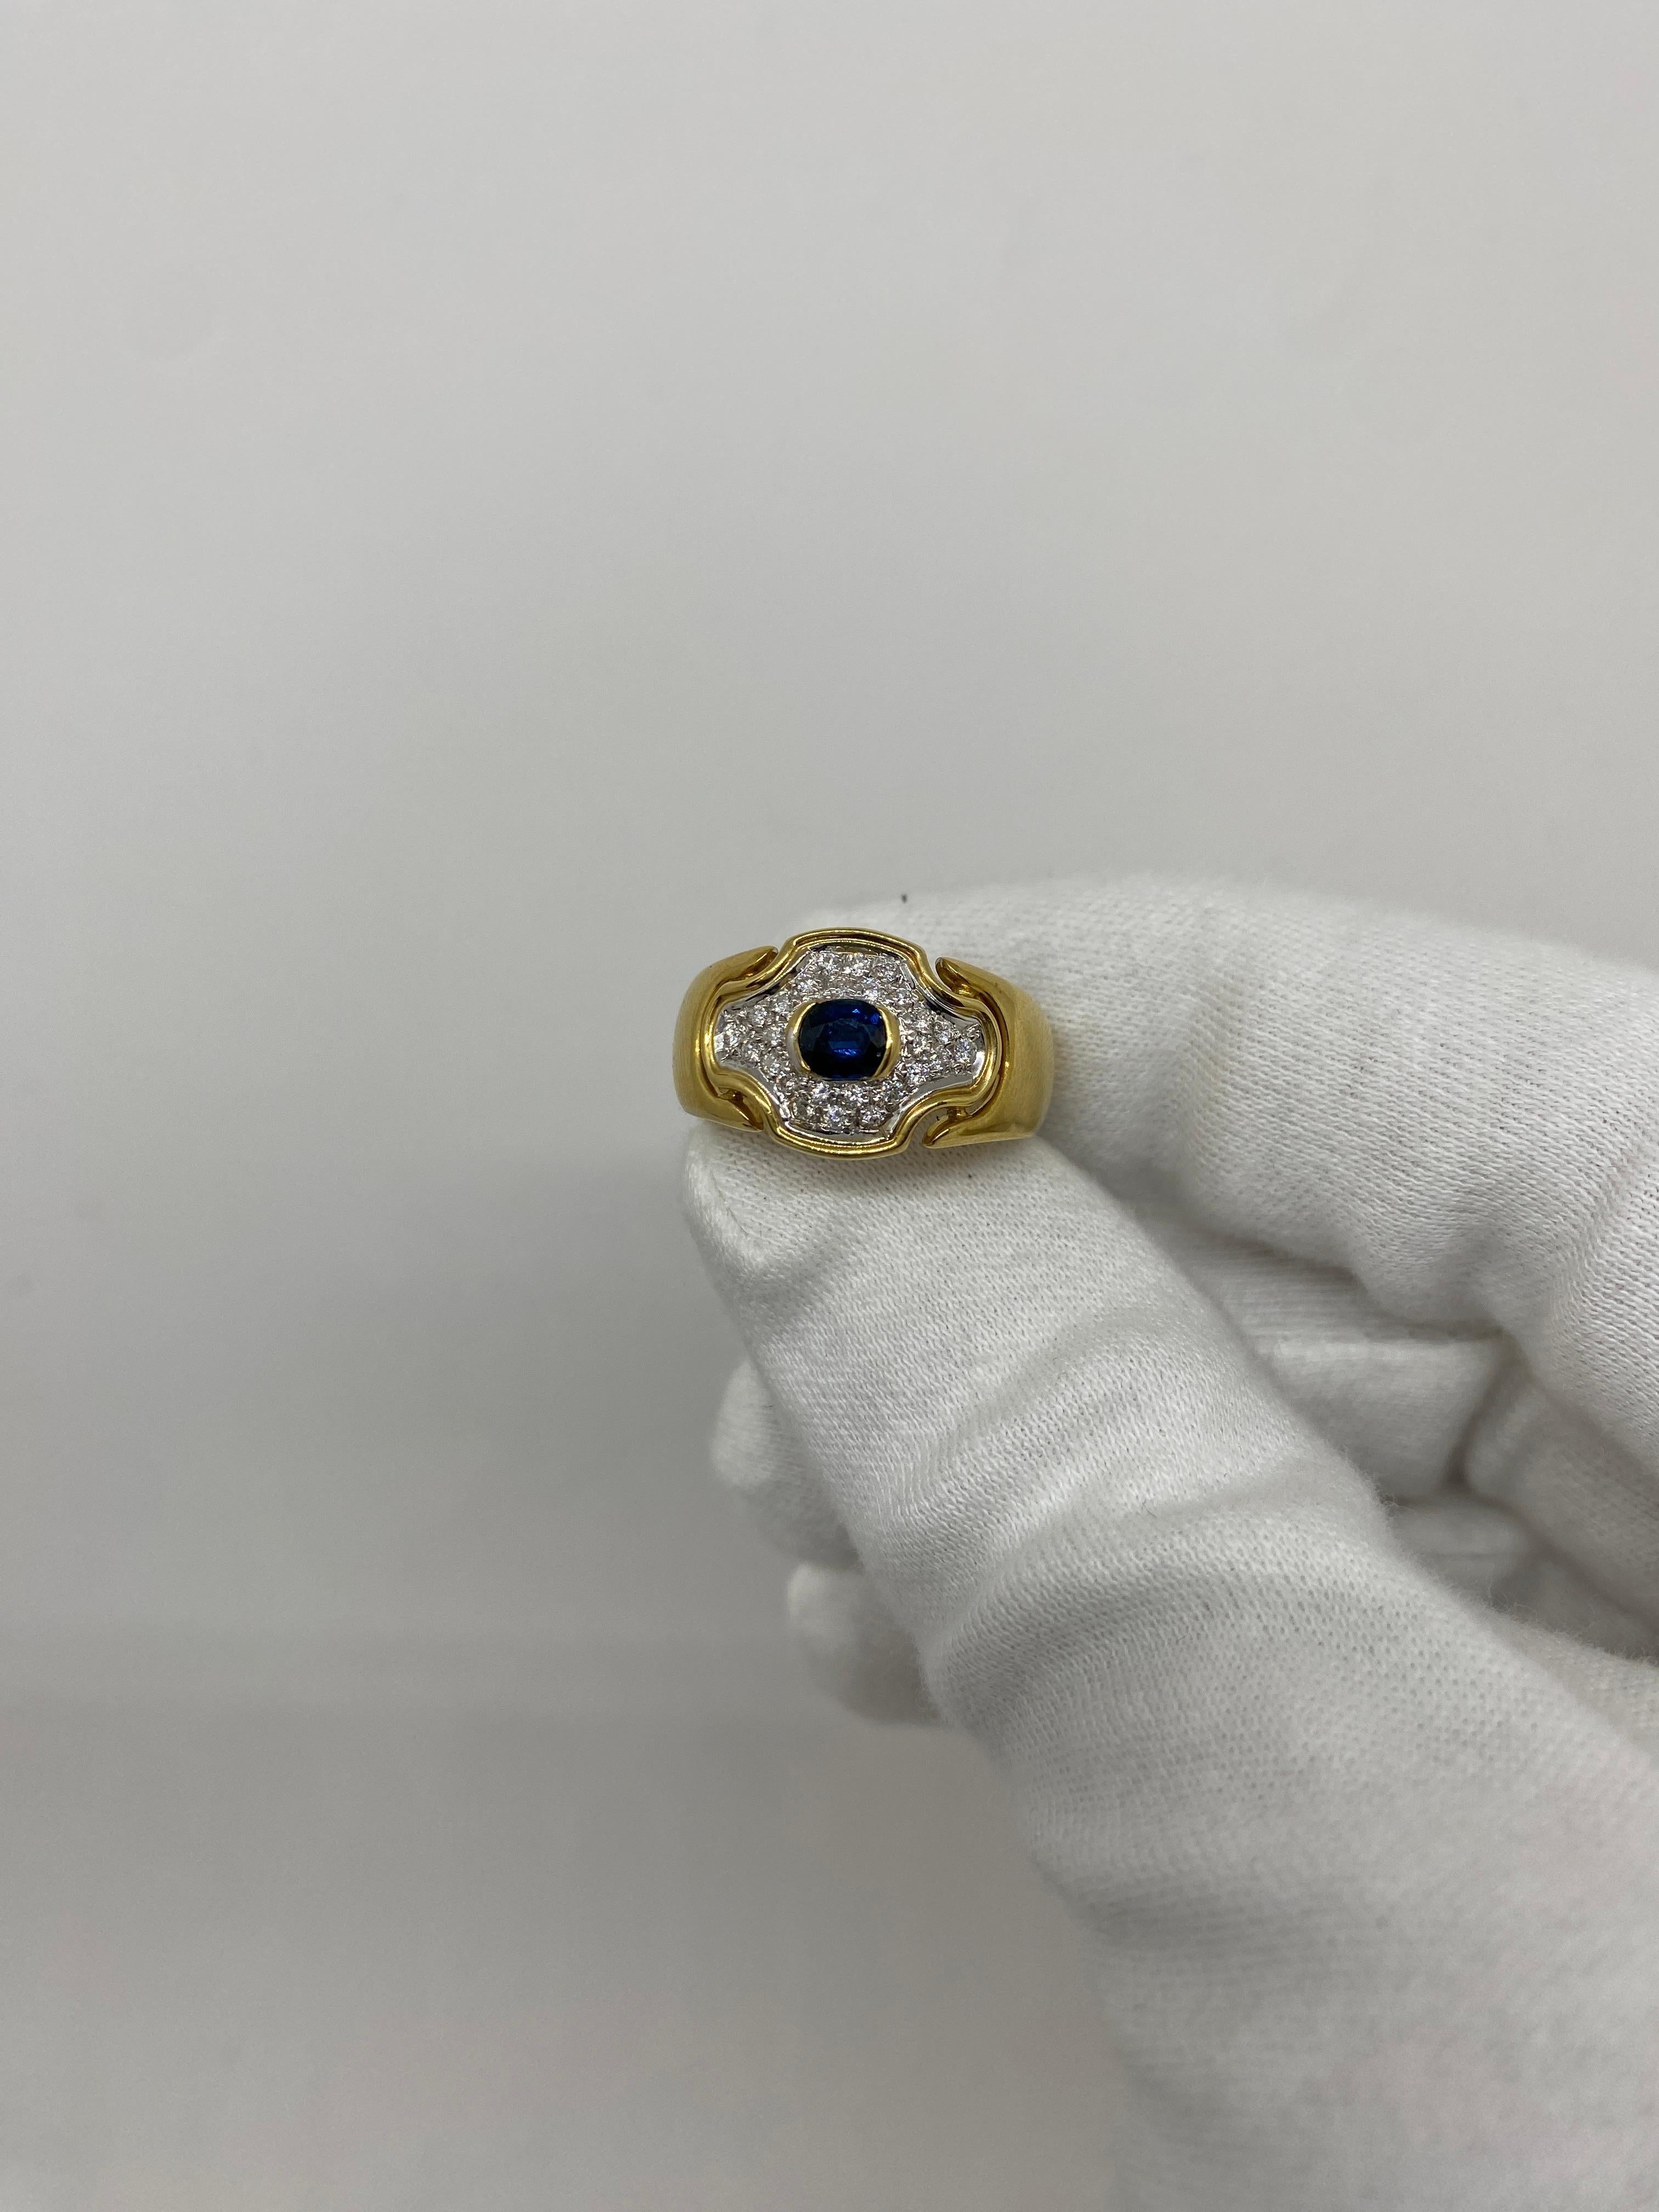 Ring made of 18kt yellow gold with natural white brilliant-cut diamonds and natural blue oval-cut sapphires

Welcome to our jewelry collection, where every piece tells a story of timeless elegance and unparalleled craftsmanship. As a family-run